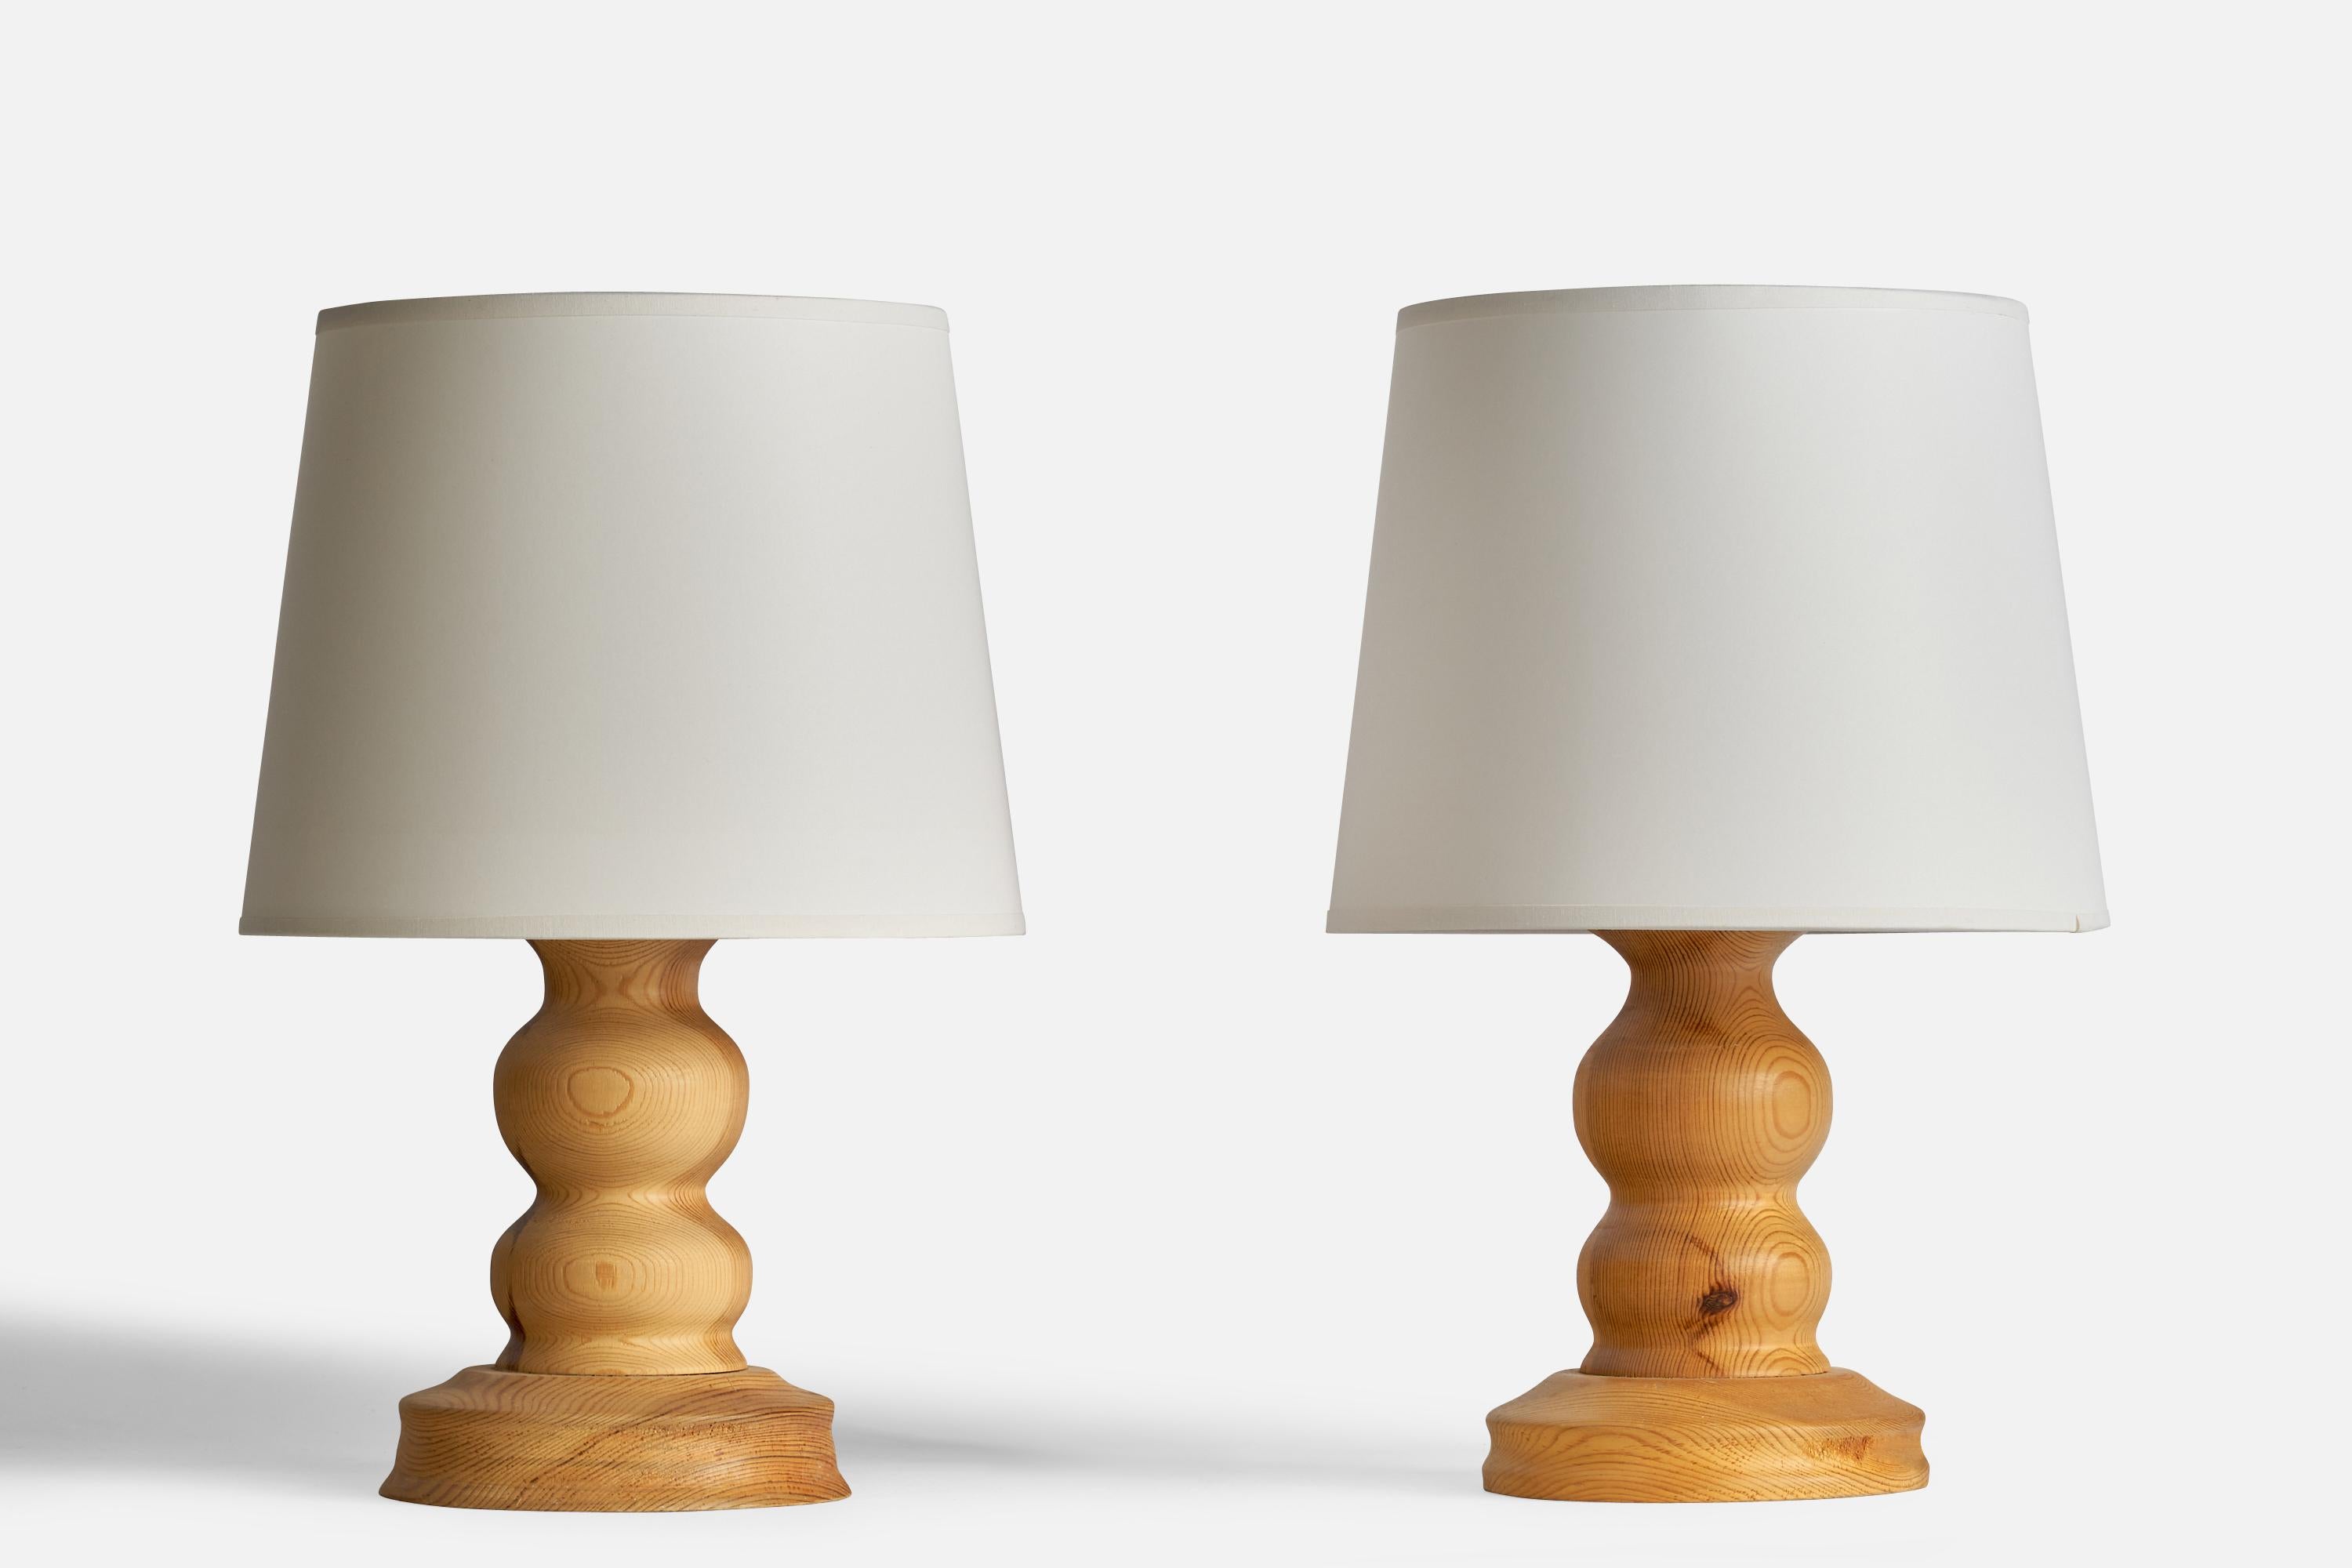 A pair of of pine table lamps designed and produced in Sweden, 1970s.

Note lamp bases are not identical in form.

Dimensions of Lamp (inches): 10.5” H x 6” Diameter
Dimensions of Shade (inches): 8” Top Diameter x 10” Bottom Diameter x 8”